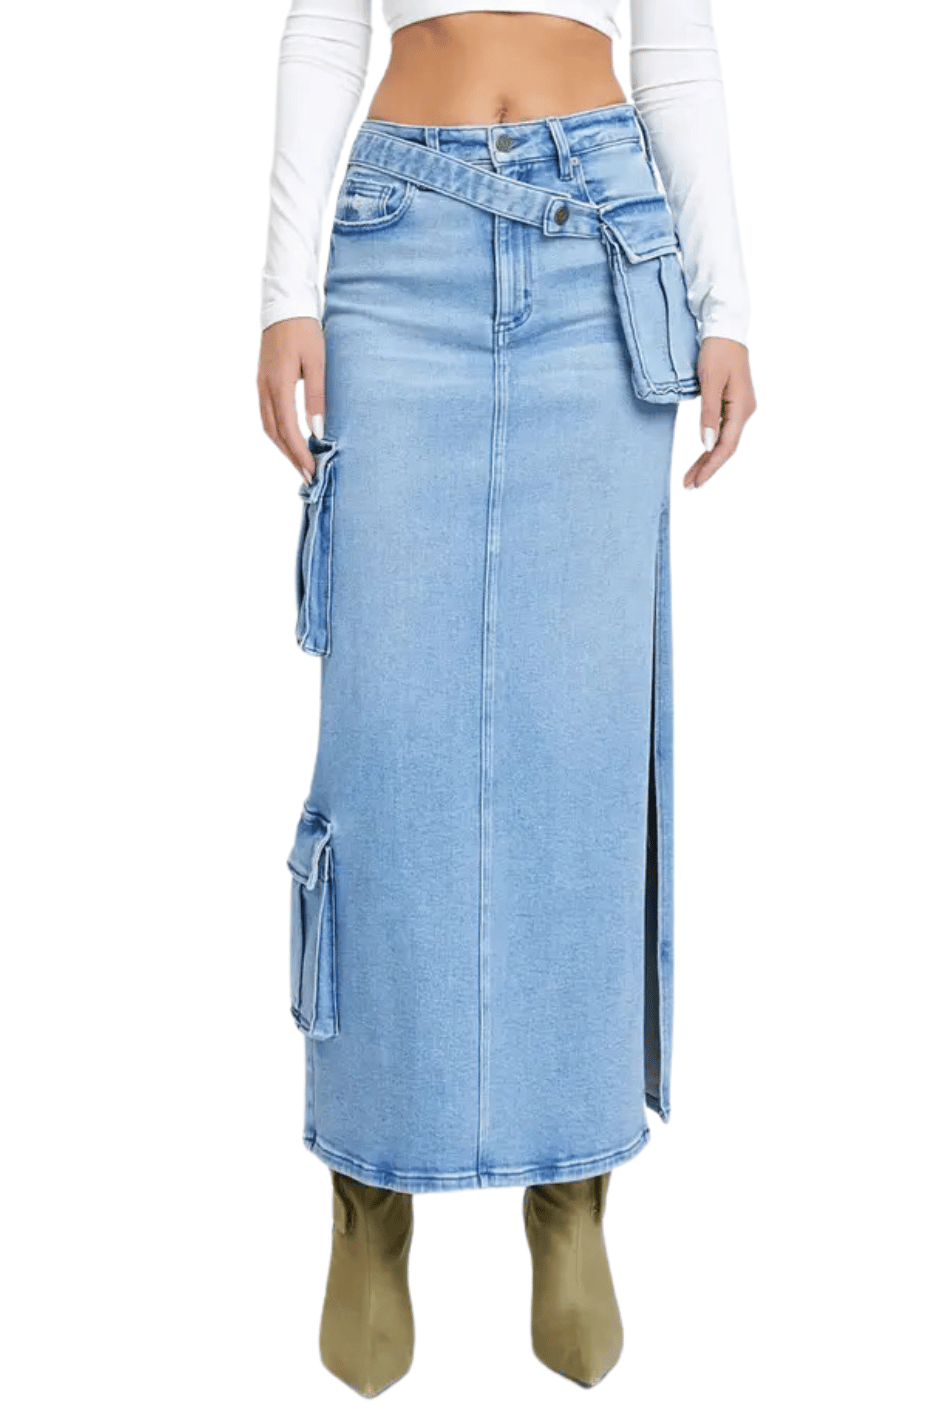 Peyton Cargo Side Slit Skirt - Expressive Collective CO.